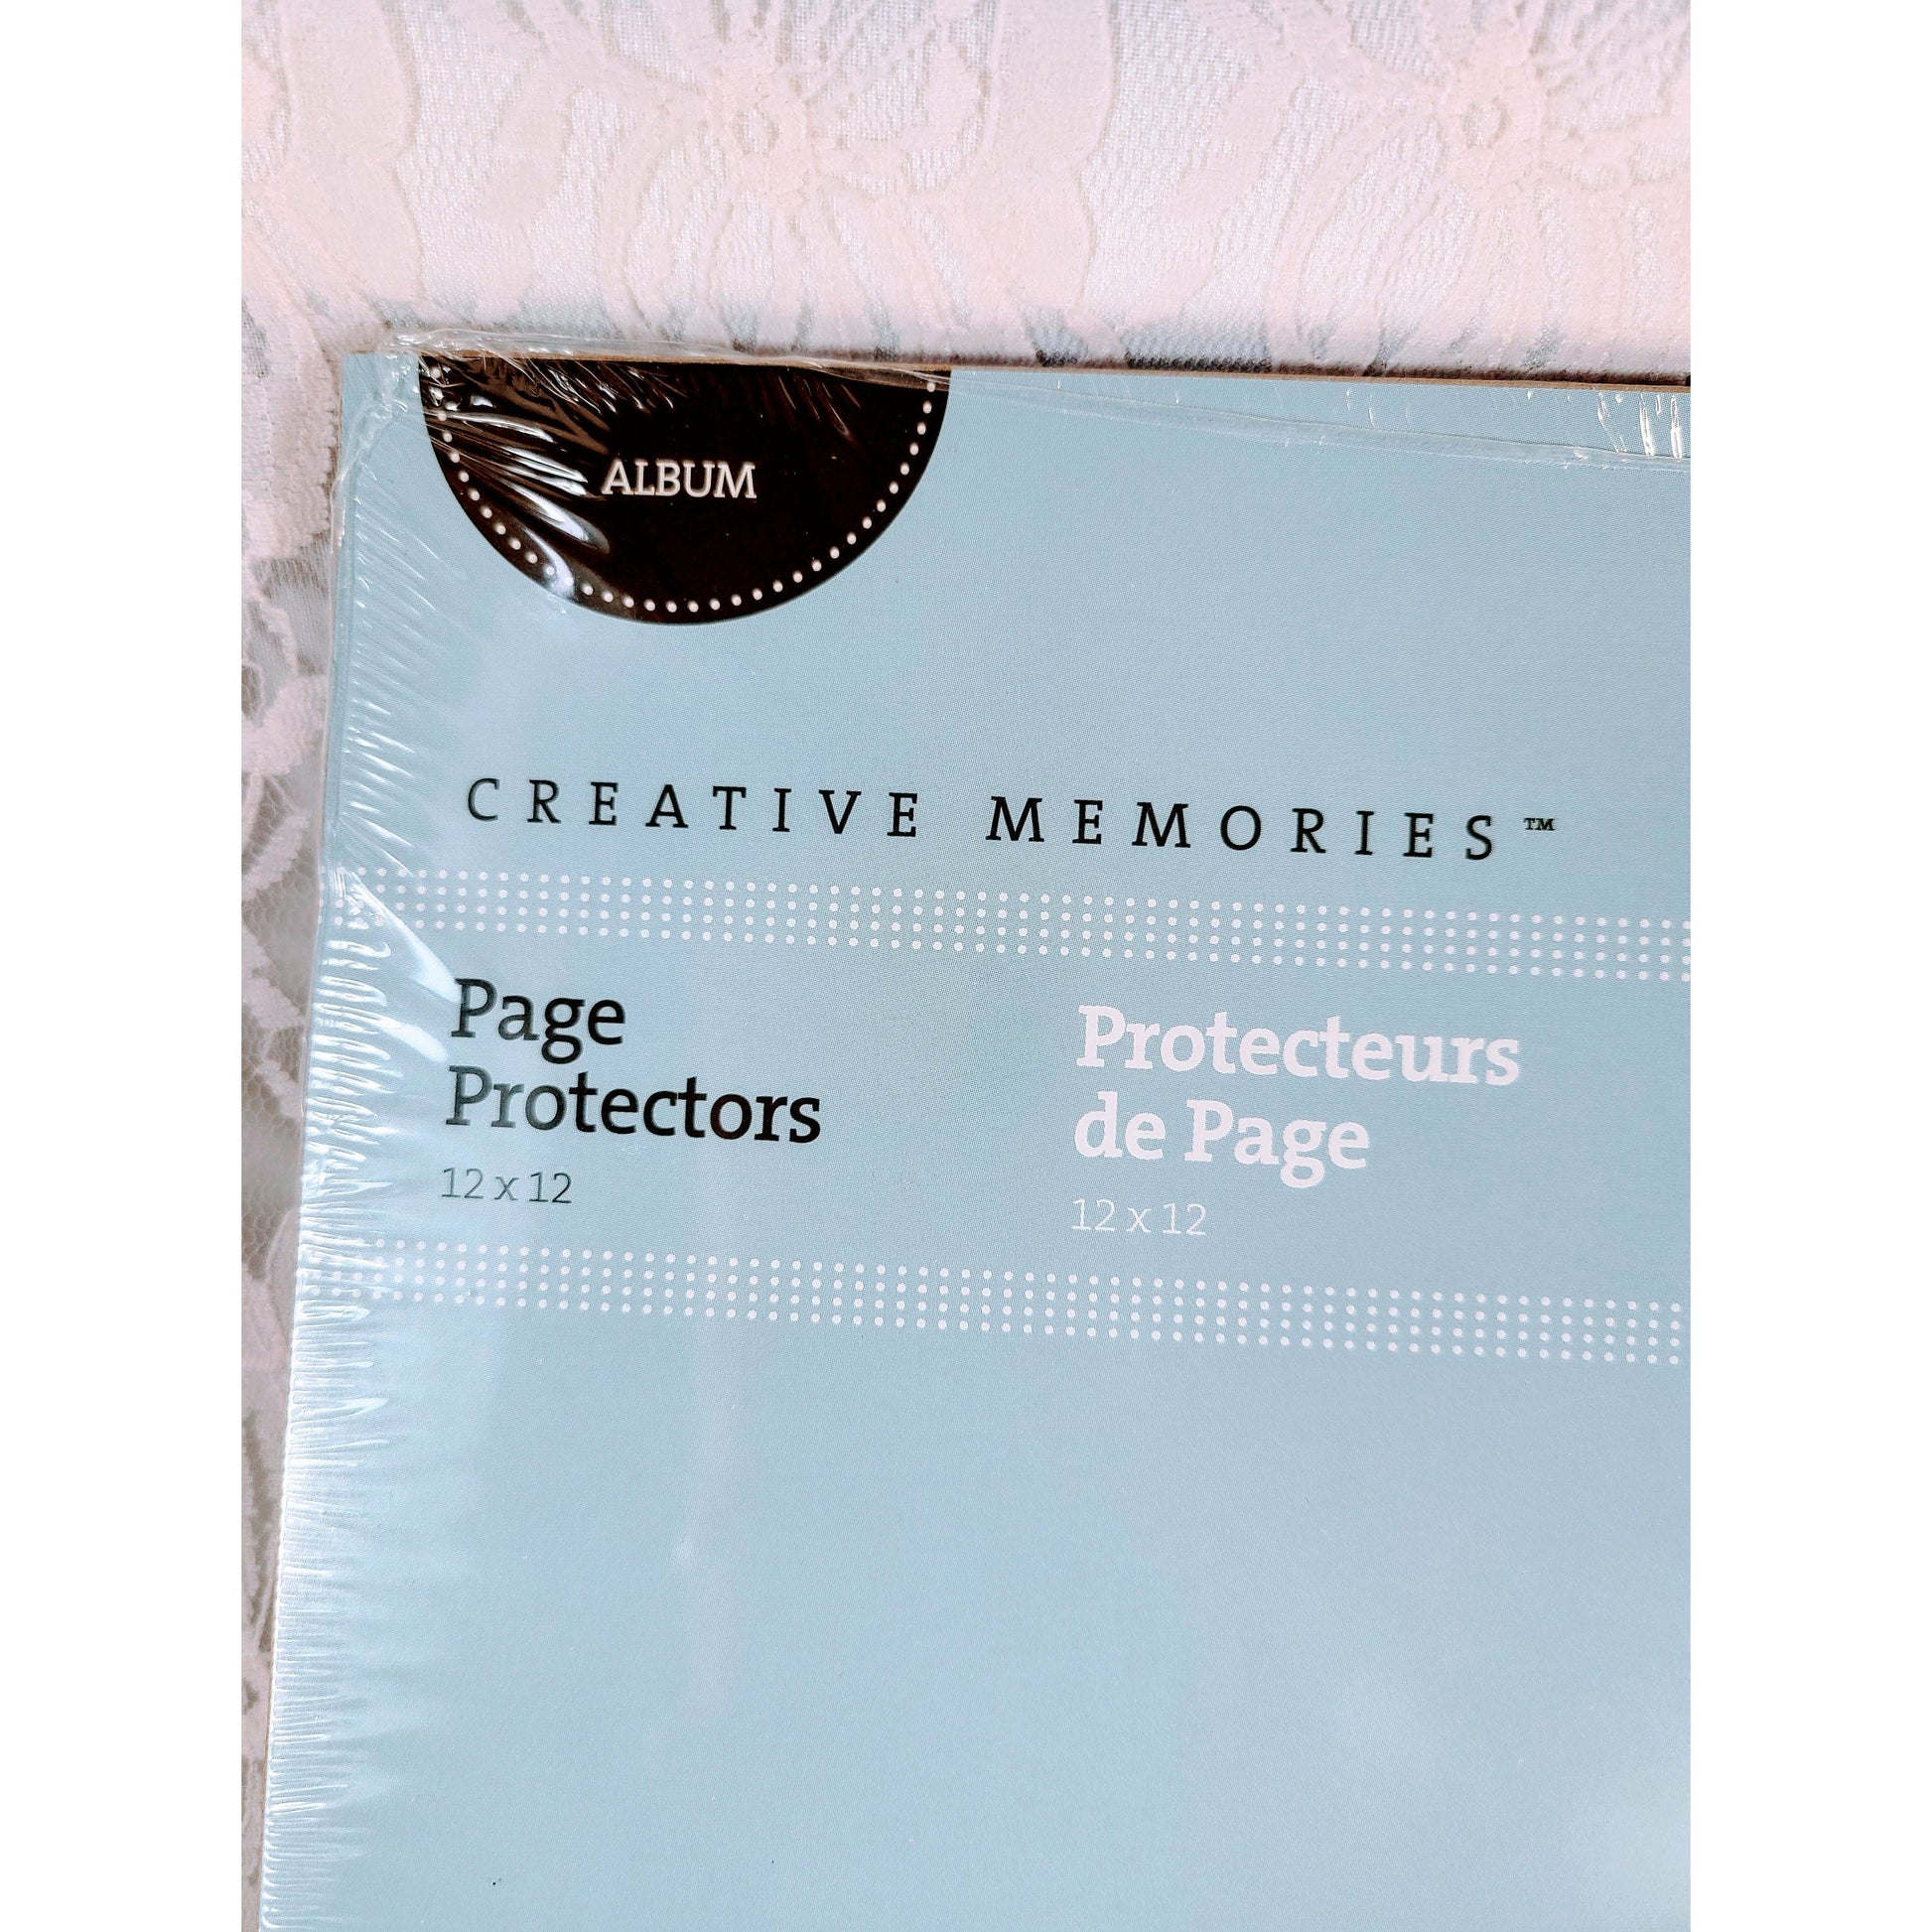 Creative Memories Collection 12x12 New In Package ~ Page Protectors 15 + 1 Bonus - 16 Pages NEW Blue Style ~ CM Scrapbooking